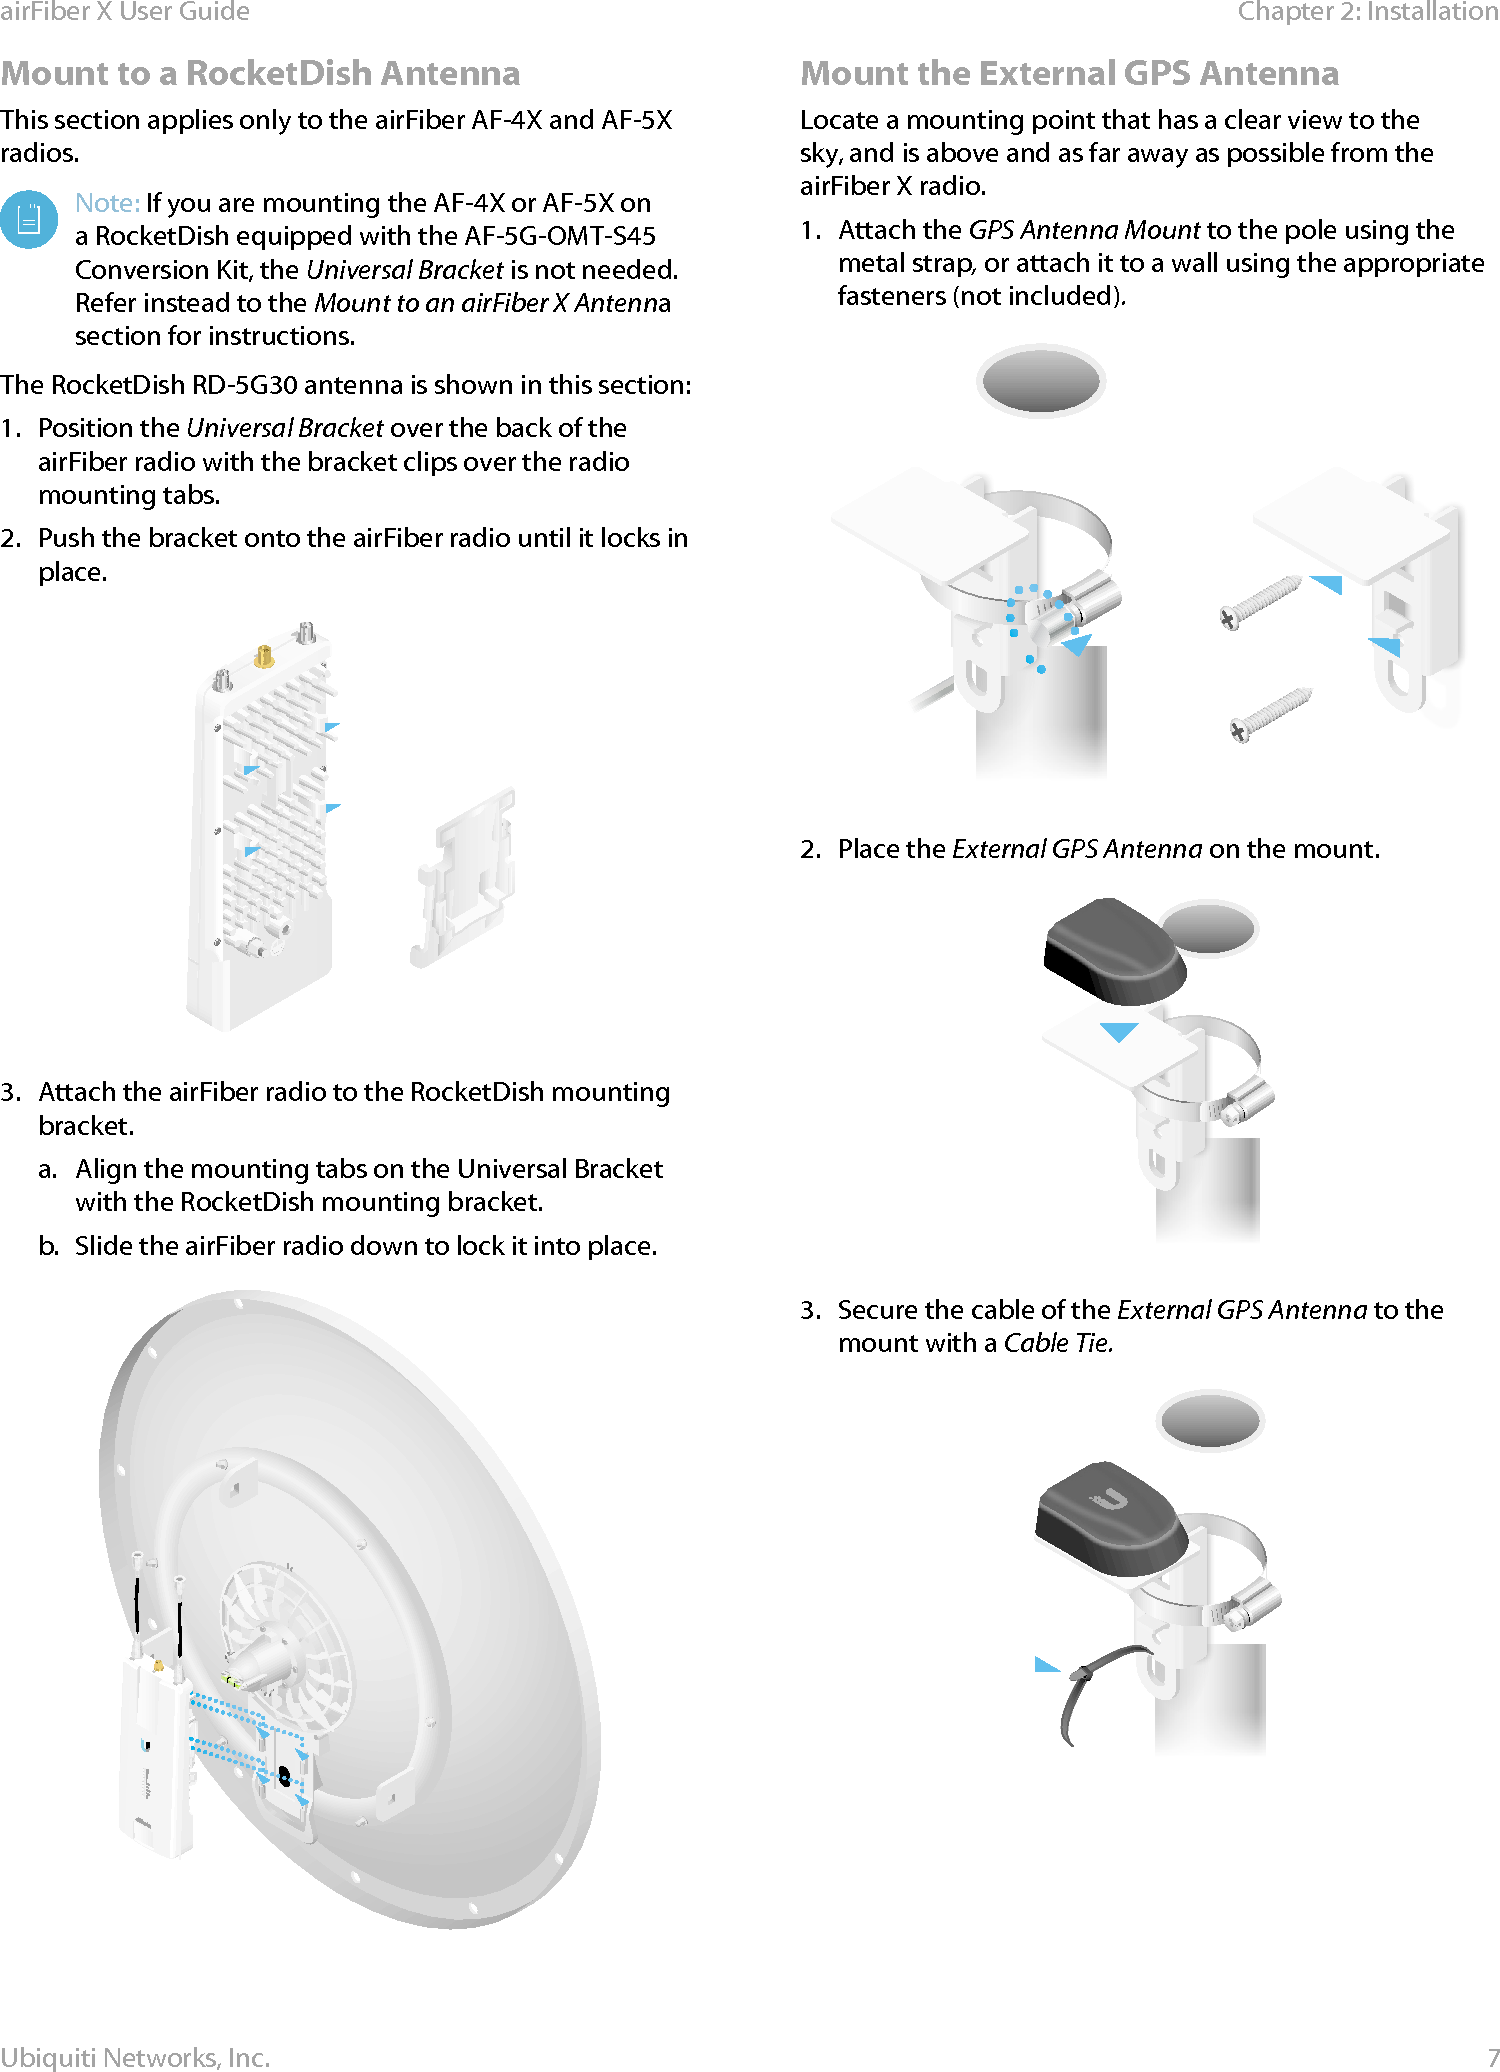 7Chapter 2: InstallationairFiber X User GuideUbiquiti Networks, Inc.Mount to a RocketDish AntennaThis section applies only to the airFiber AF-4X and AF-5X radios.Note: If you are mounting the AF-4X or AF-5X on a RocketDish equipped with the AF-5G-OMT-S45 Conversion Kit, the Universal Bracket is not needed. Refer instead to the Mount to an airFiber X Antenna section for instructions. The RocketDish RD-5G30 antenna is shown in this section:1.  Position the Universal Bracket over the back of the airFiber radio with the bracket clips over the radio mounting tabs.2.  Push the bracket onto the airFiber radio until it locks in place.3.  Attach the airFiber radio to the RocketDish mounting bracket. a.  Align the mounting tabs on the Universal Bracket with the RocketDish mounting bracket.b.  Slide the airFiber radio down to lock it into place.Mount the External GPS AntennaLocate a mounting point that has a clear view to the sky, and is above and as far away as possible from the airFiberX radio.1.  Attach the GPS Antenna Mount to the pole using the metal strap, or attach it to a wall using the appropriate fasteners (notincluded).2.  Place the External GPS Antenna on the mount.3.  Secure the cable of the External GPS Antenna to the mount with a Cable Tie.